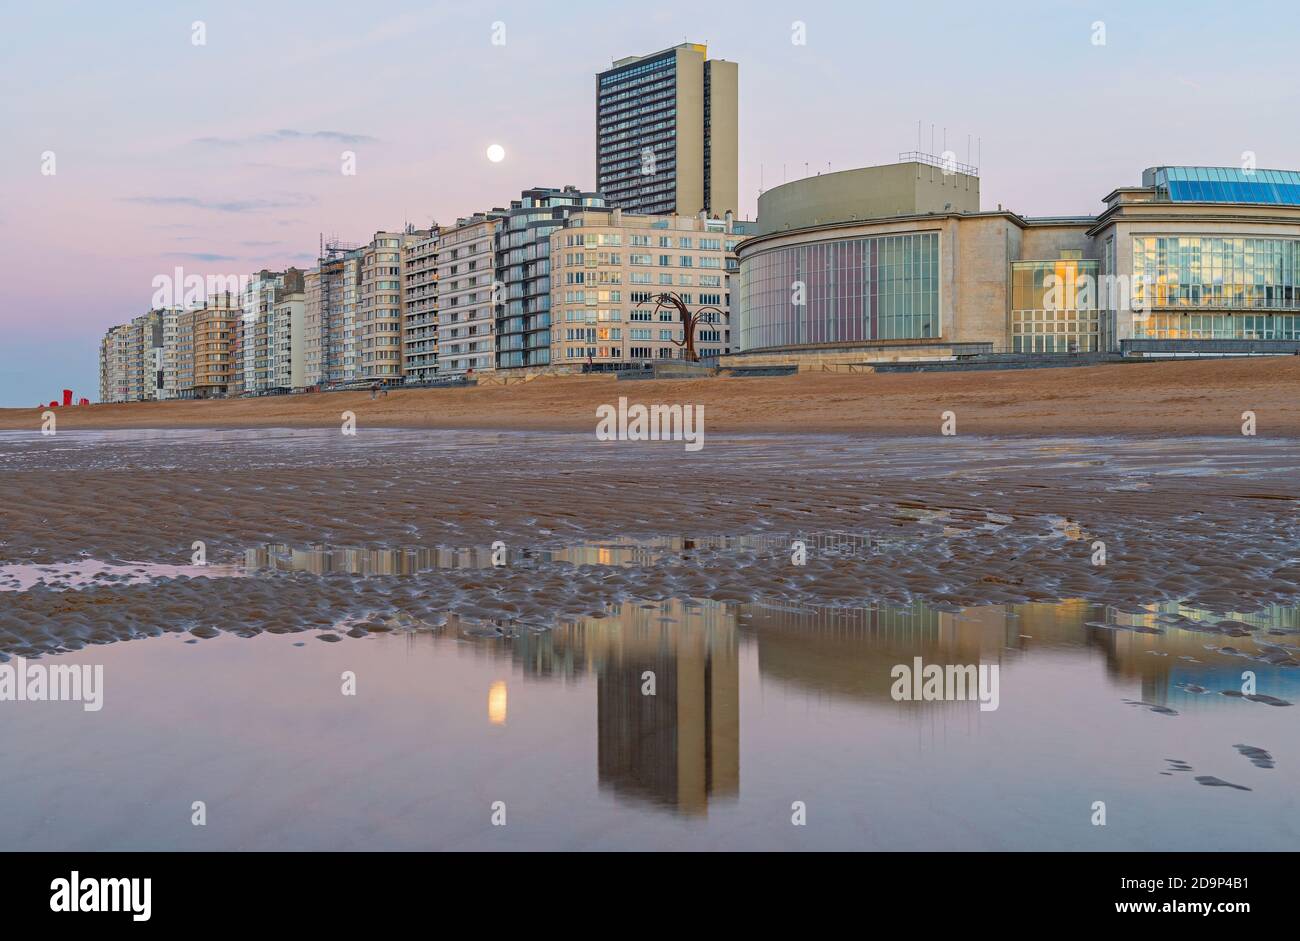 Skyline of Oostende (Ostend) with North Sea beach at sunset and full moon reflection, Belgium. Stock Photo